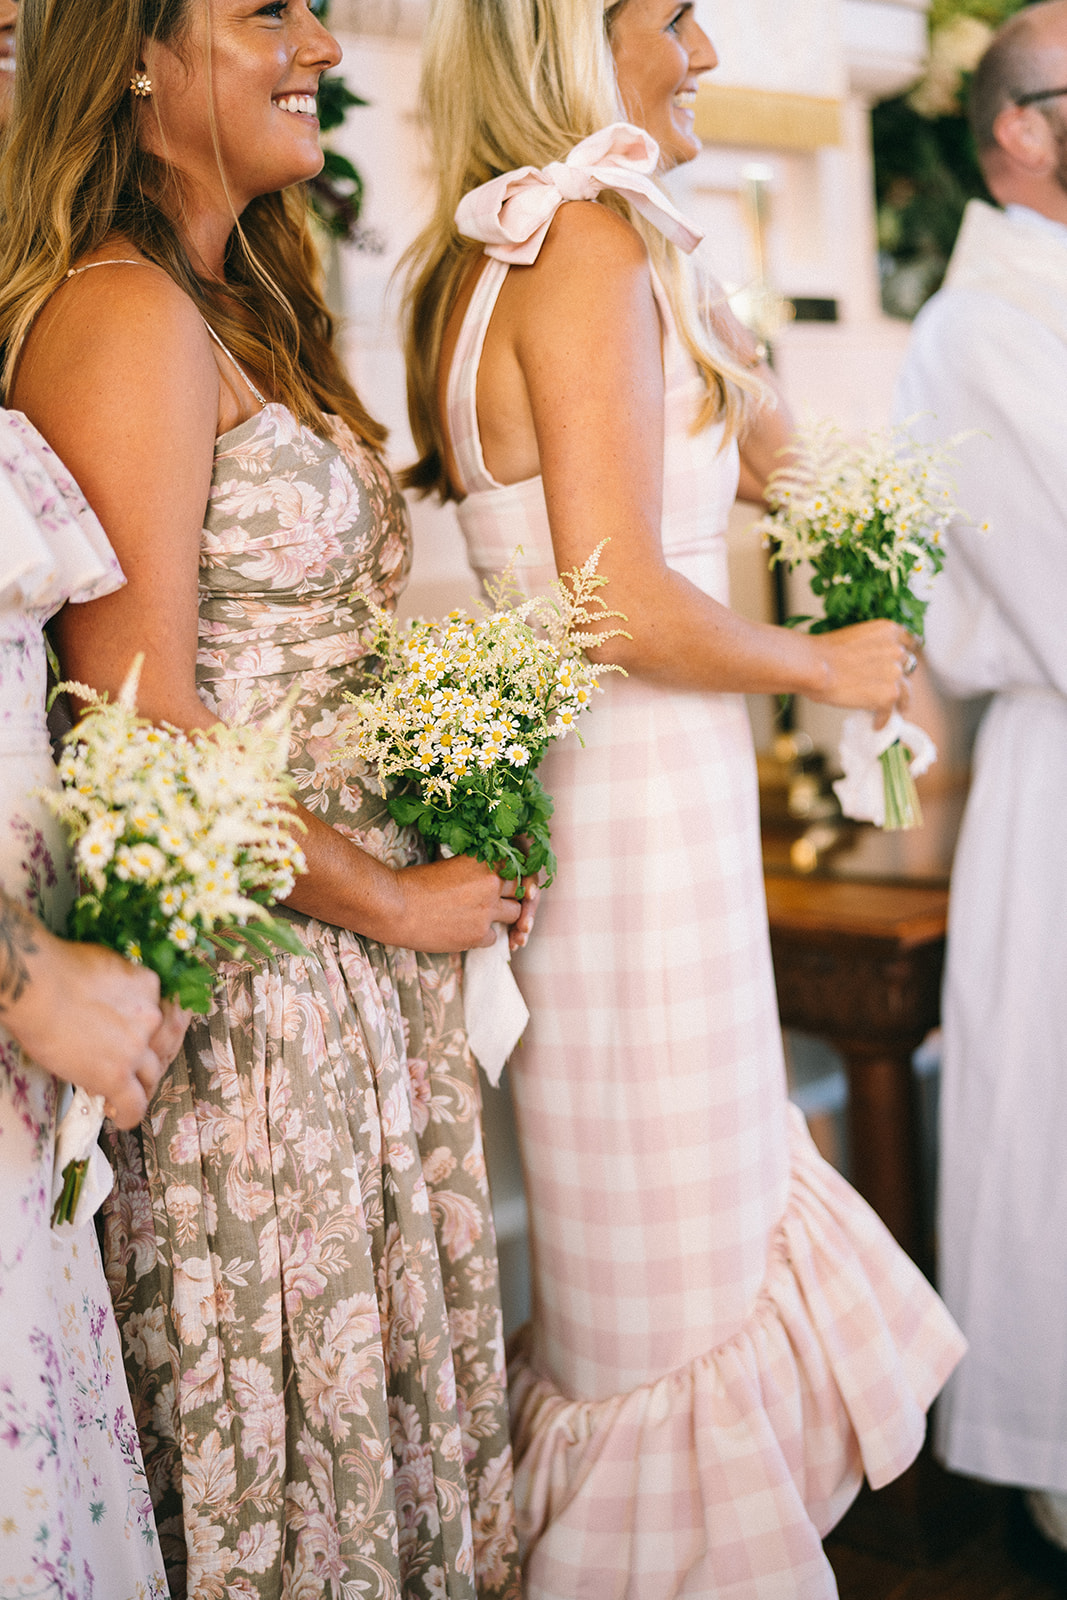 Women in pink flowery dresses holding small off white flower bouquets standing together and smiling